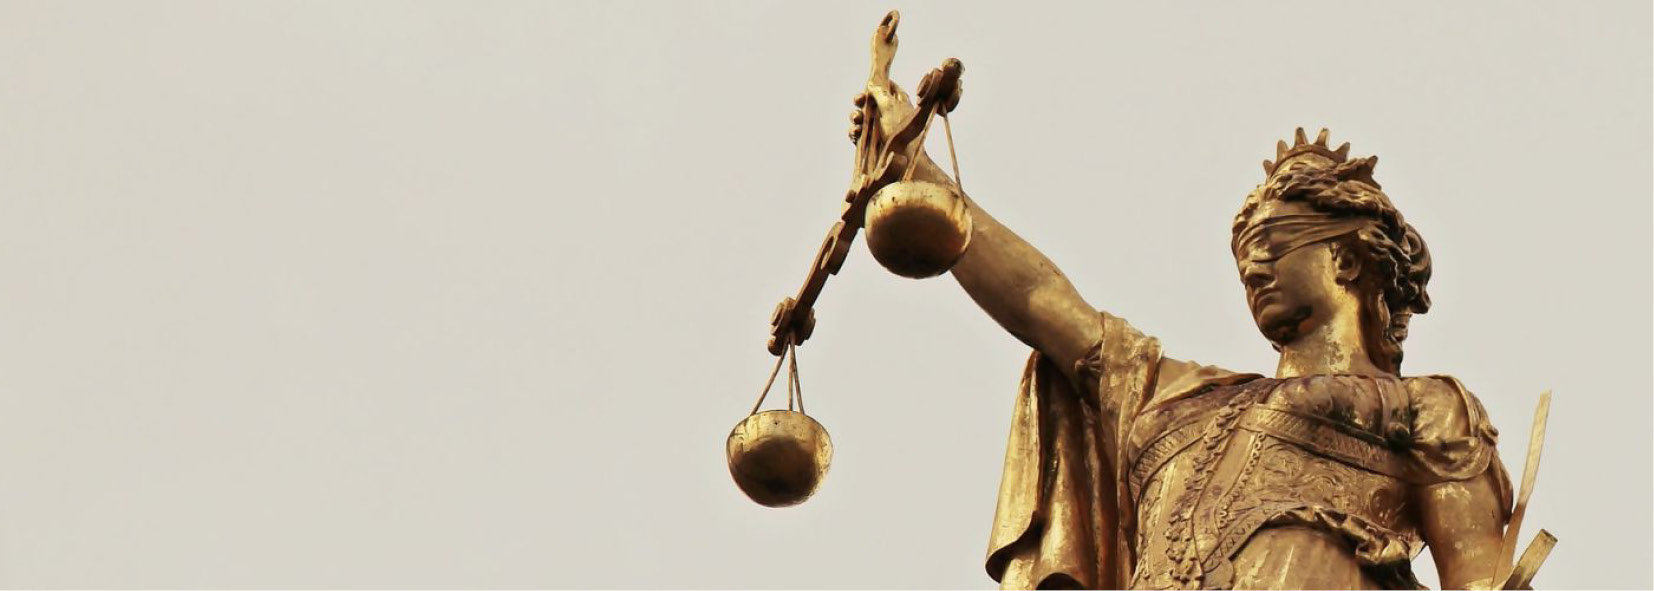 Justice status with scales of justice